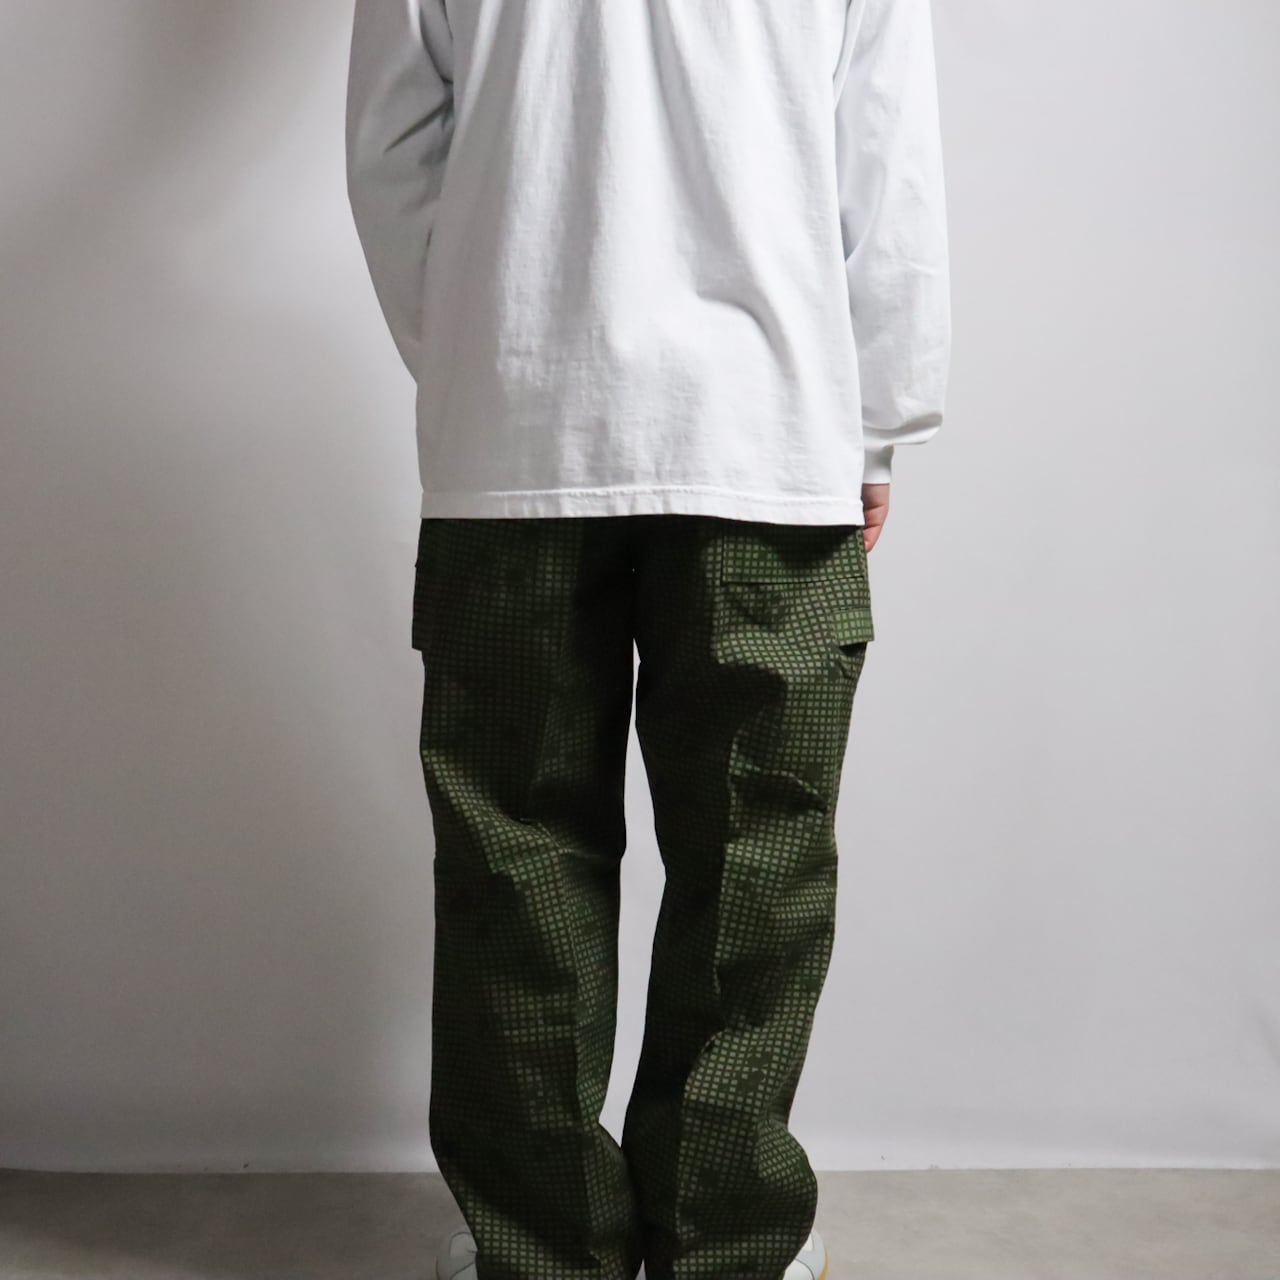 DEADSTOCK】U.S.ARMY NIGHT DESERT CAMO OVERPANTS WITH POCKET